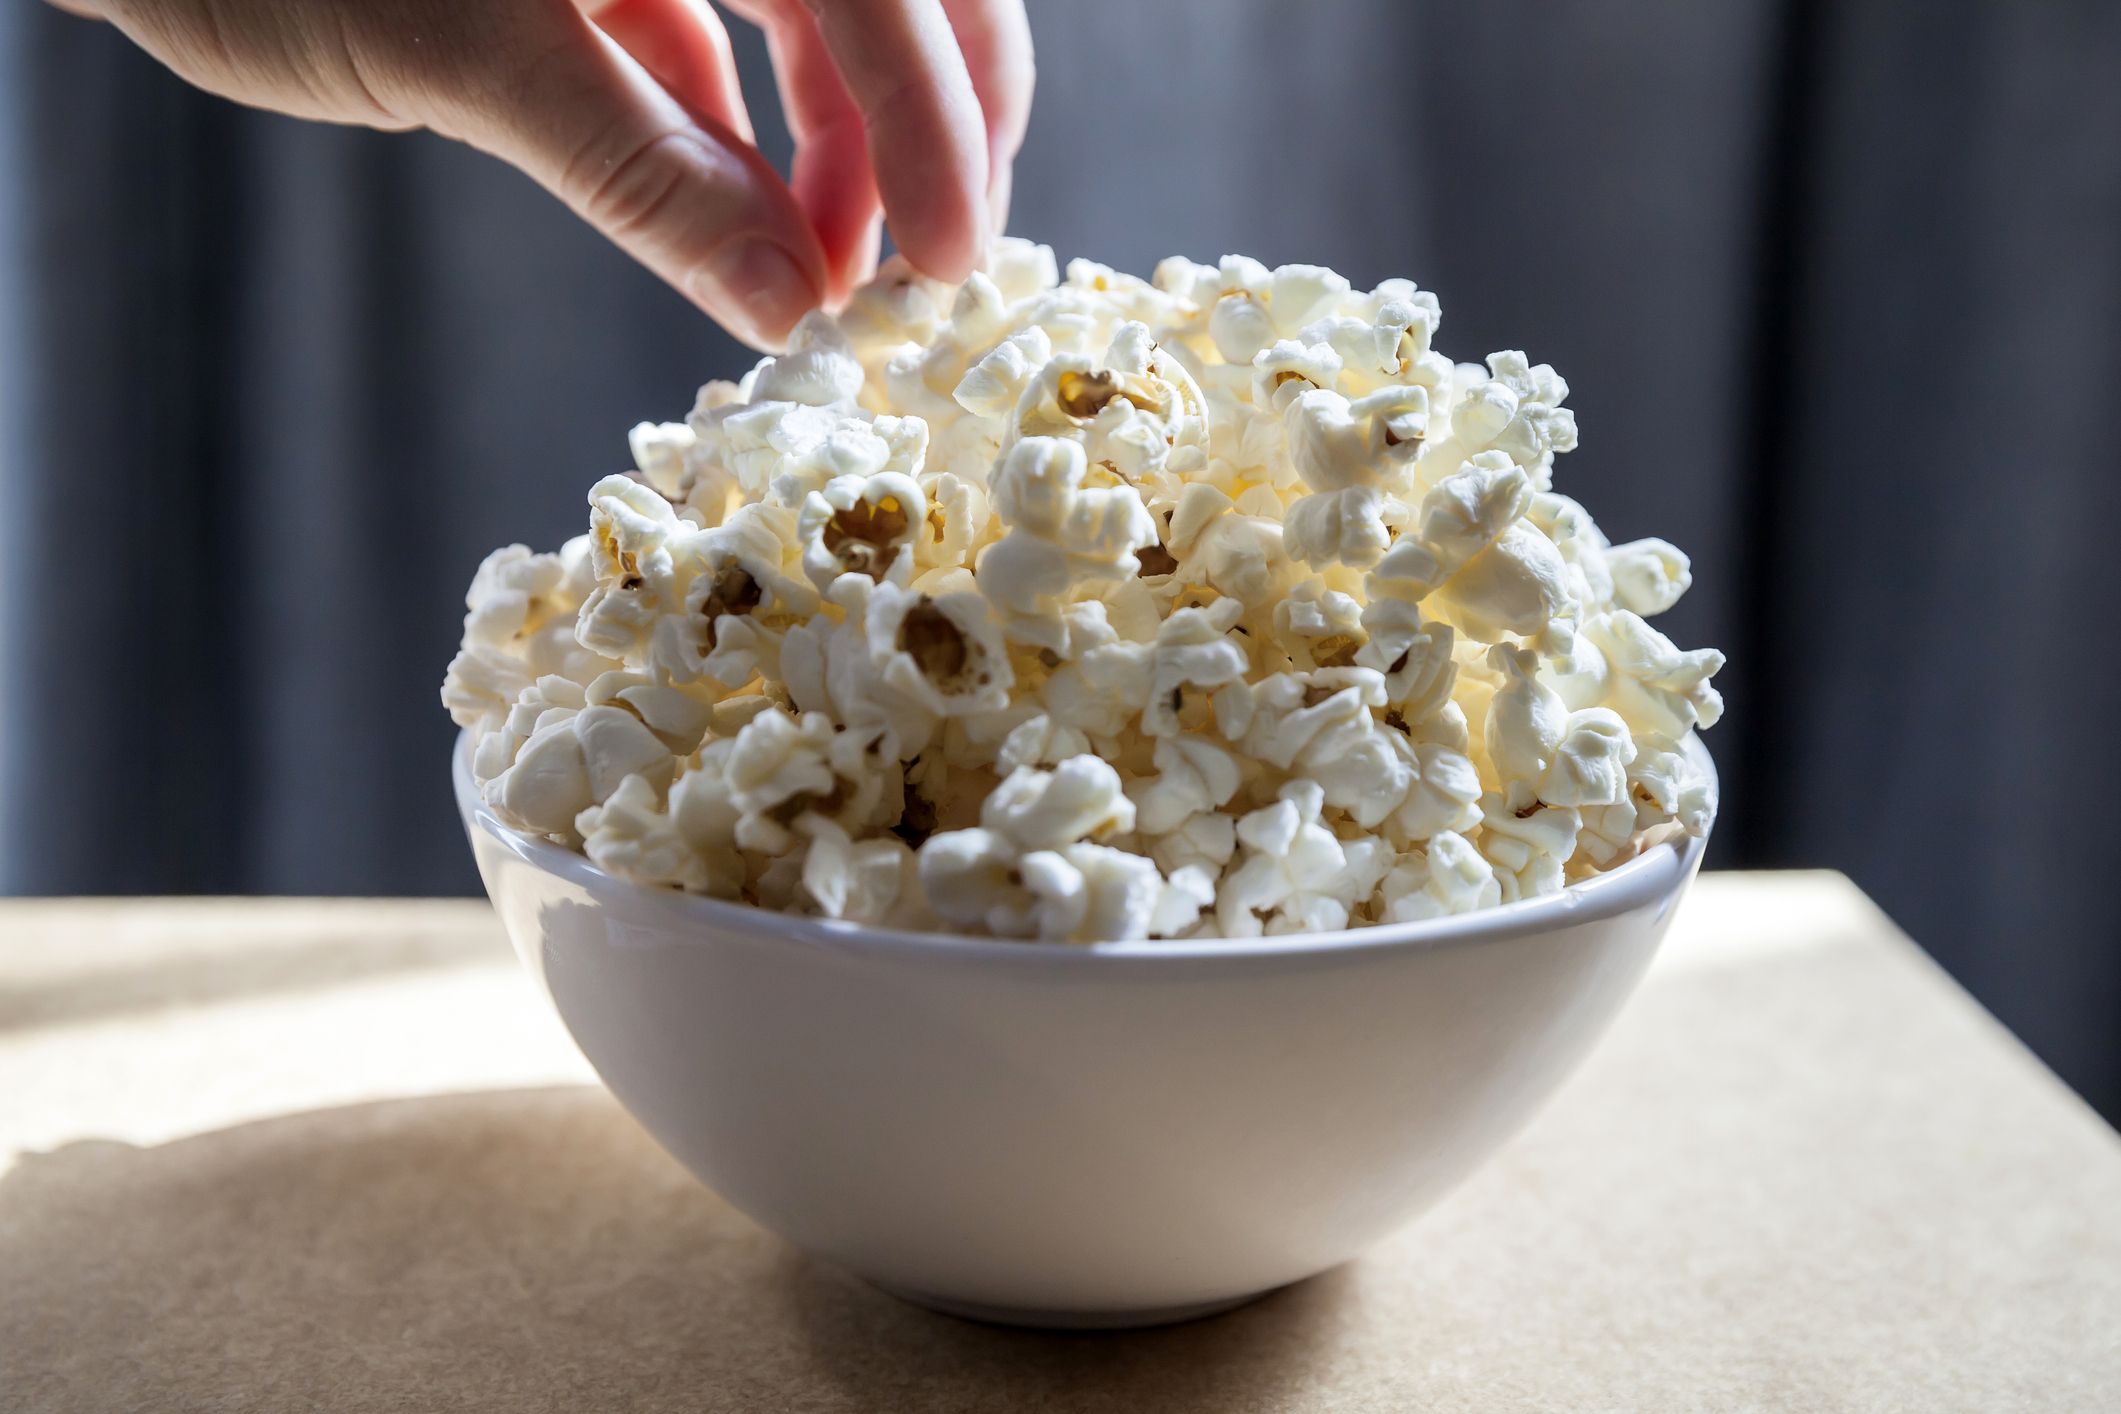 Hd Popcorn American Sex Vuedioes - 16 Best Foods for Constipation - What To Eat When Constipated